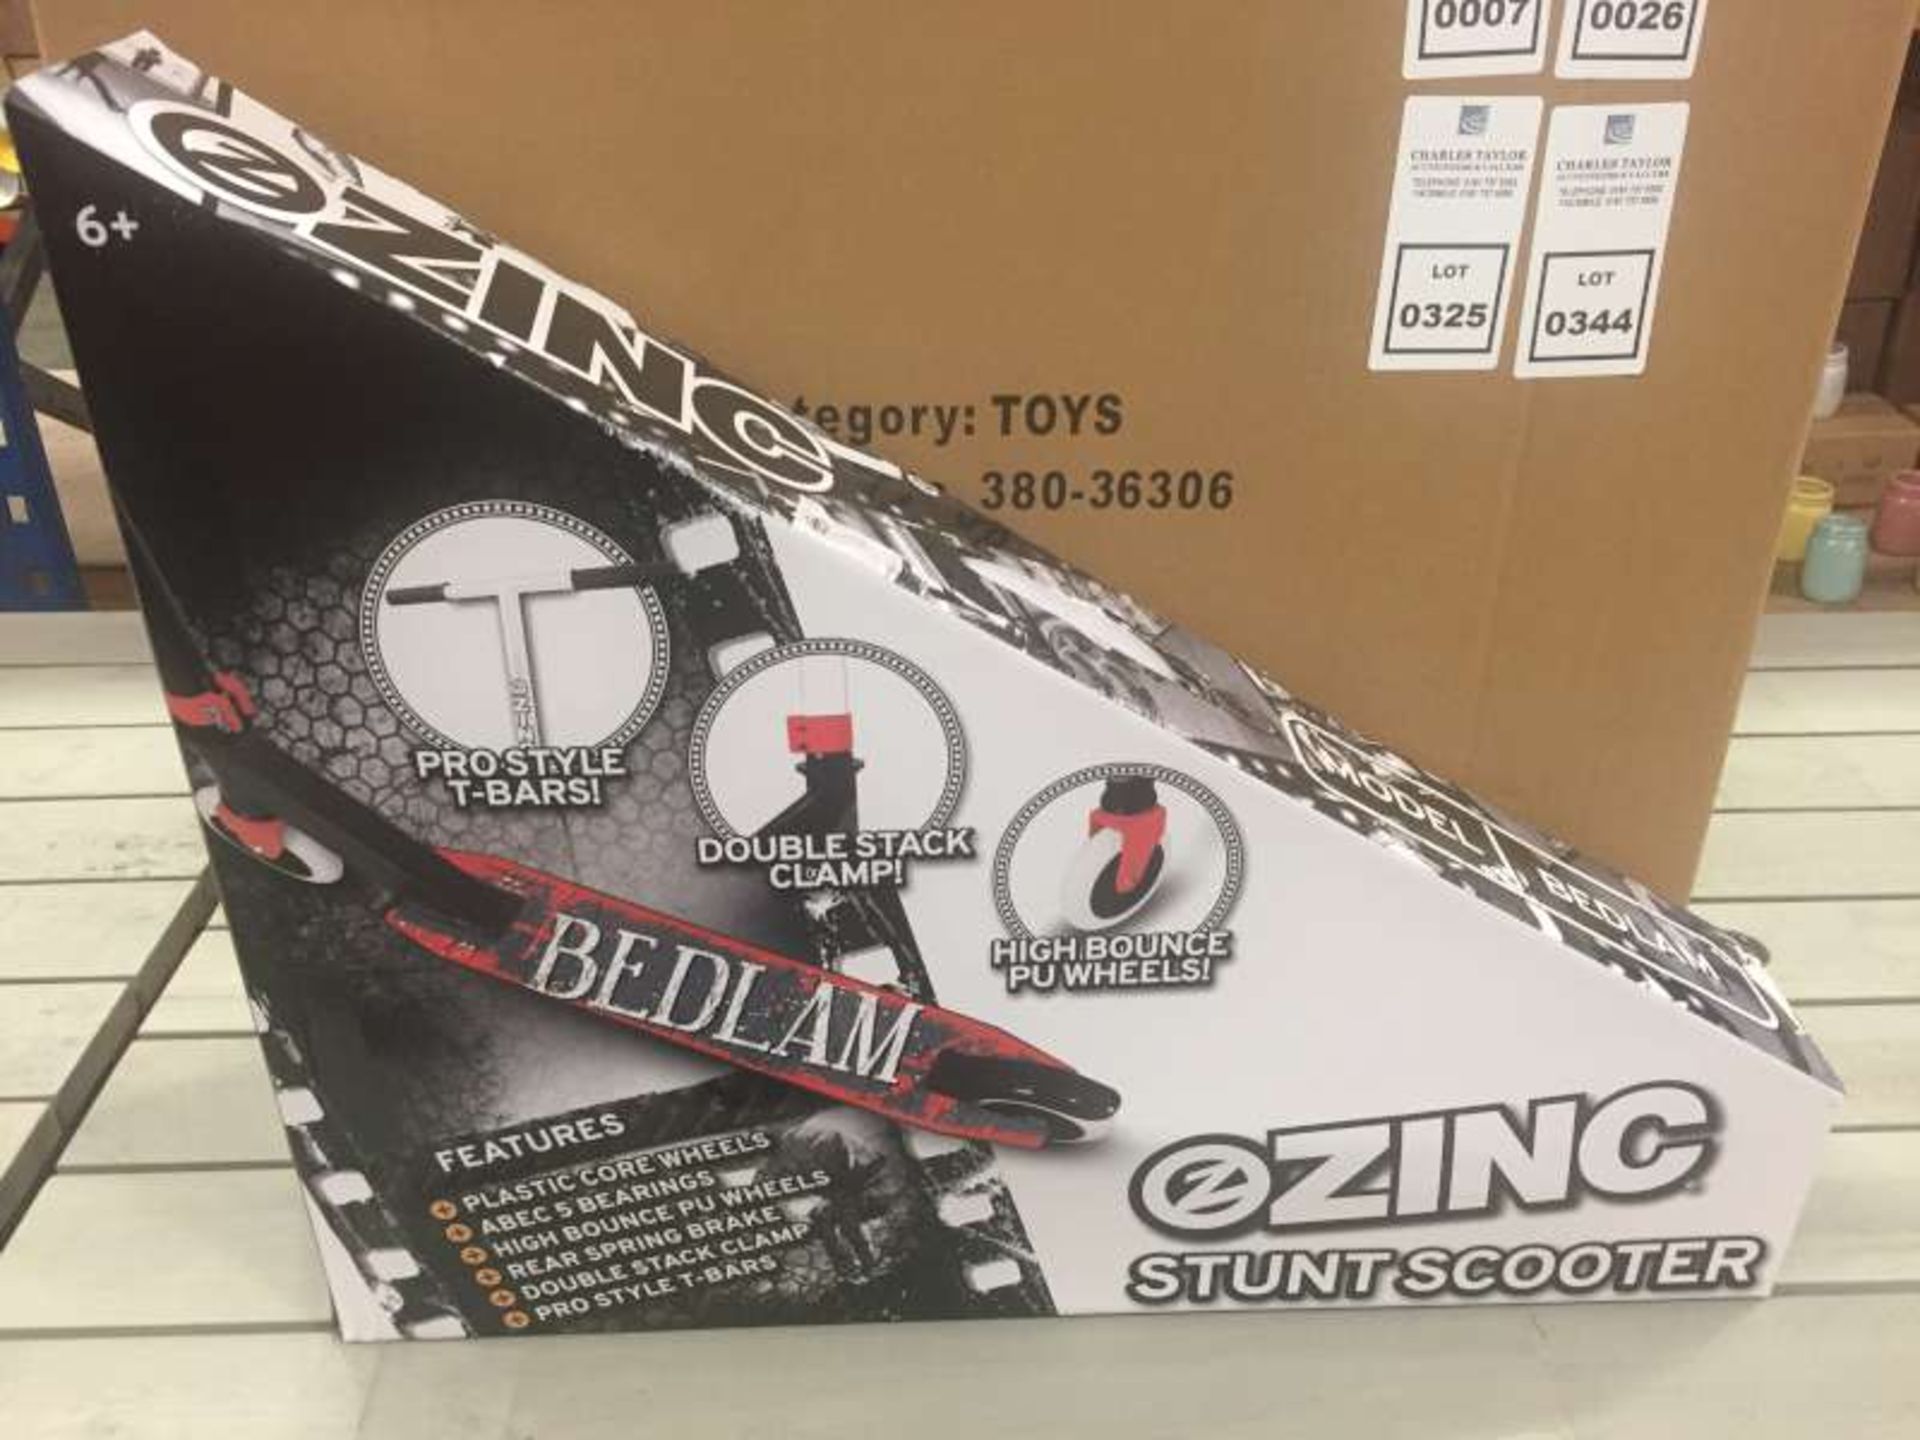 6 X BRAND NEW BOXED ZINC BEDLAM STUNT SCOOTERS IN 3 BOXES